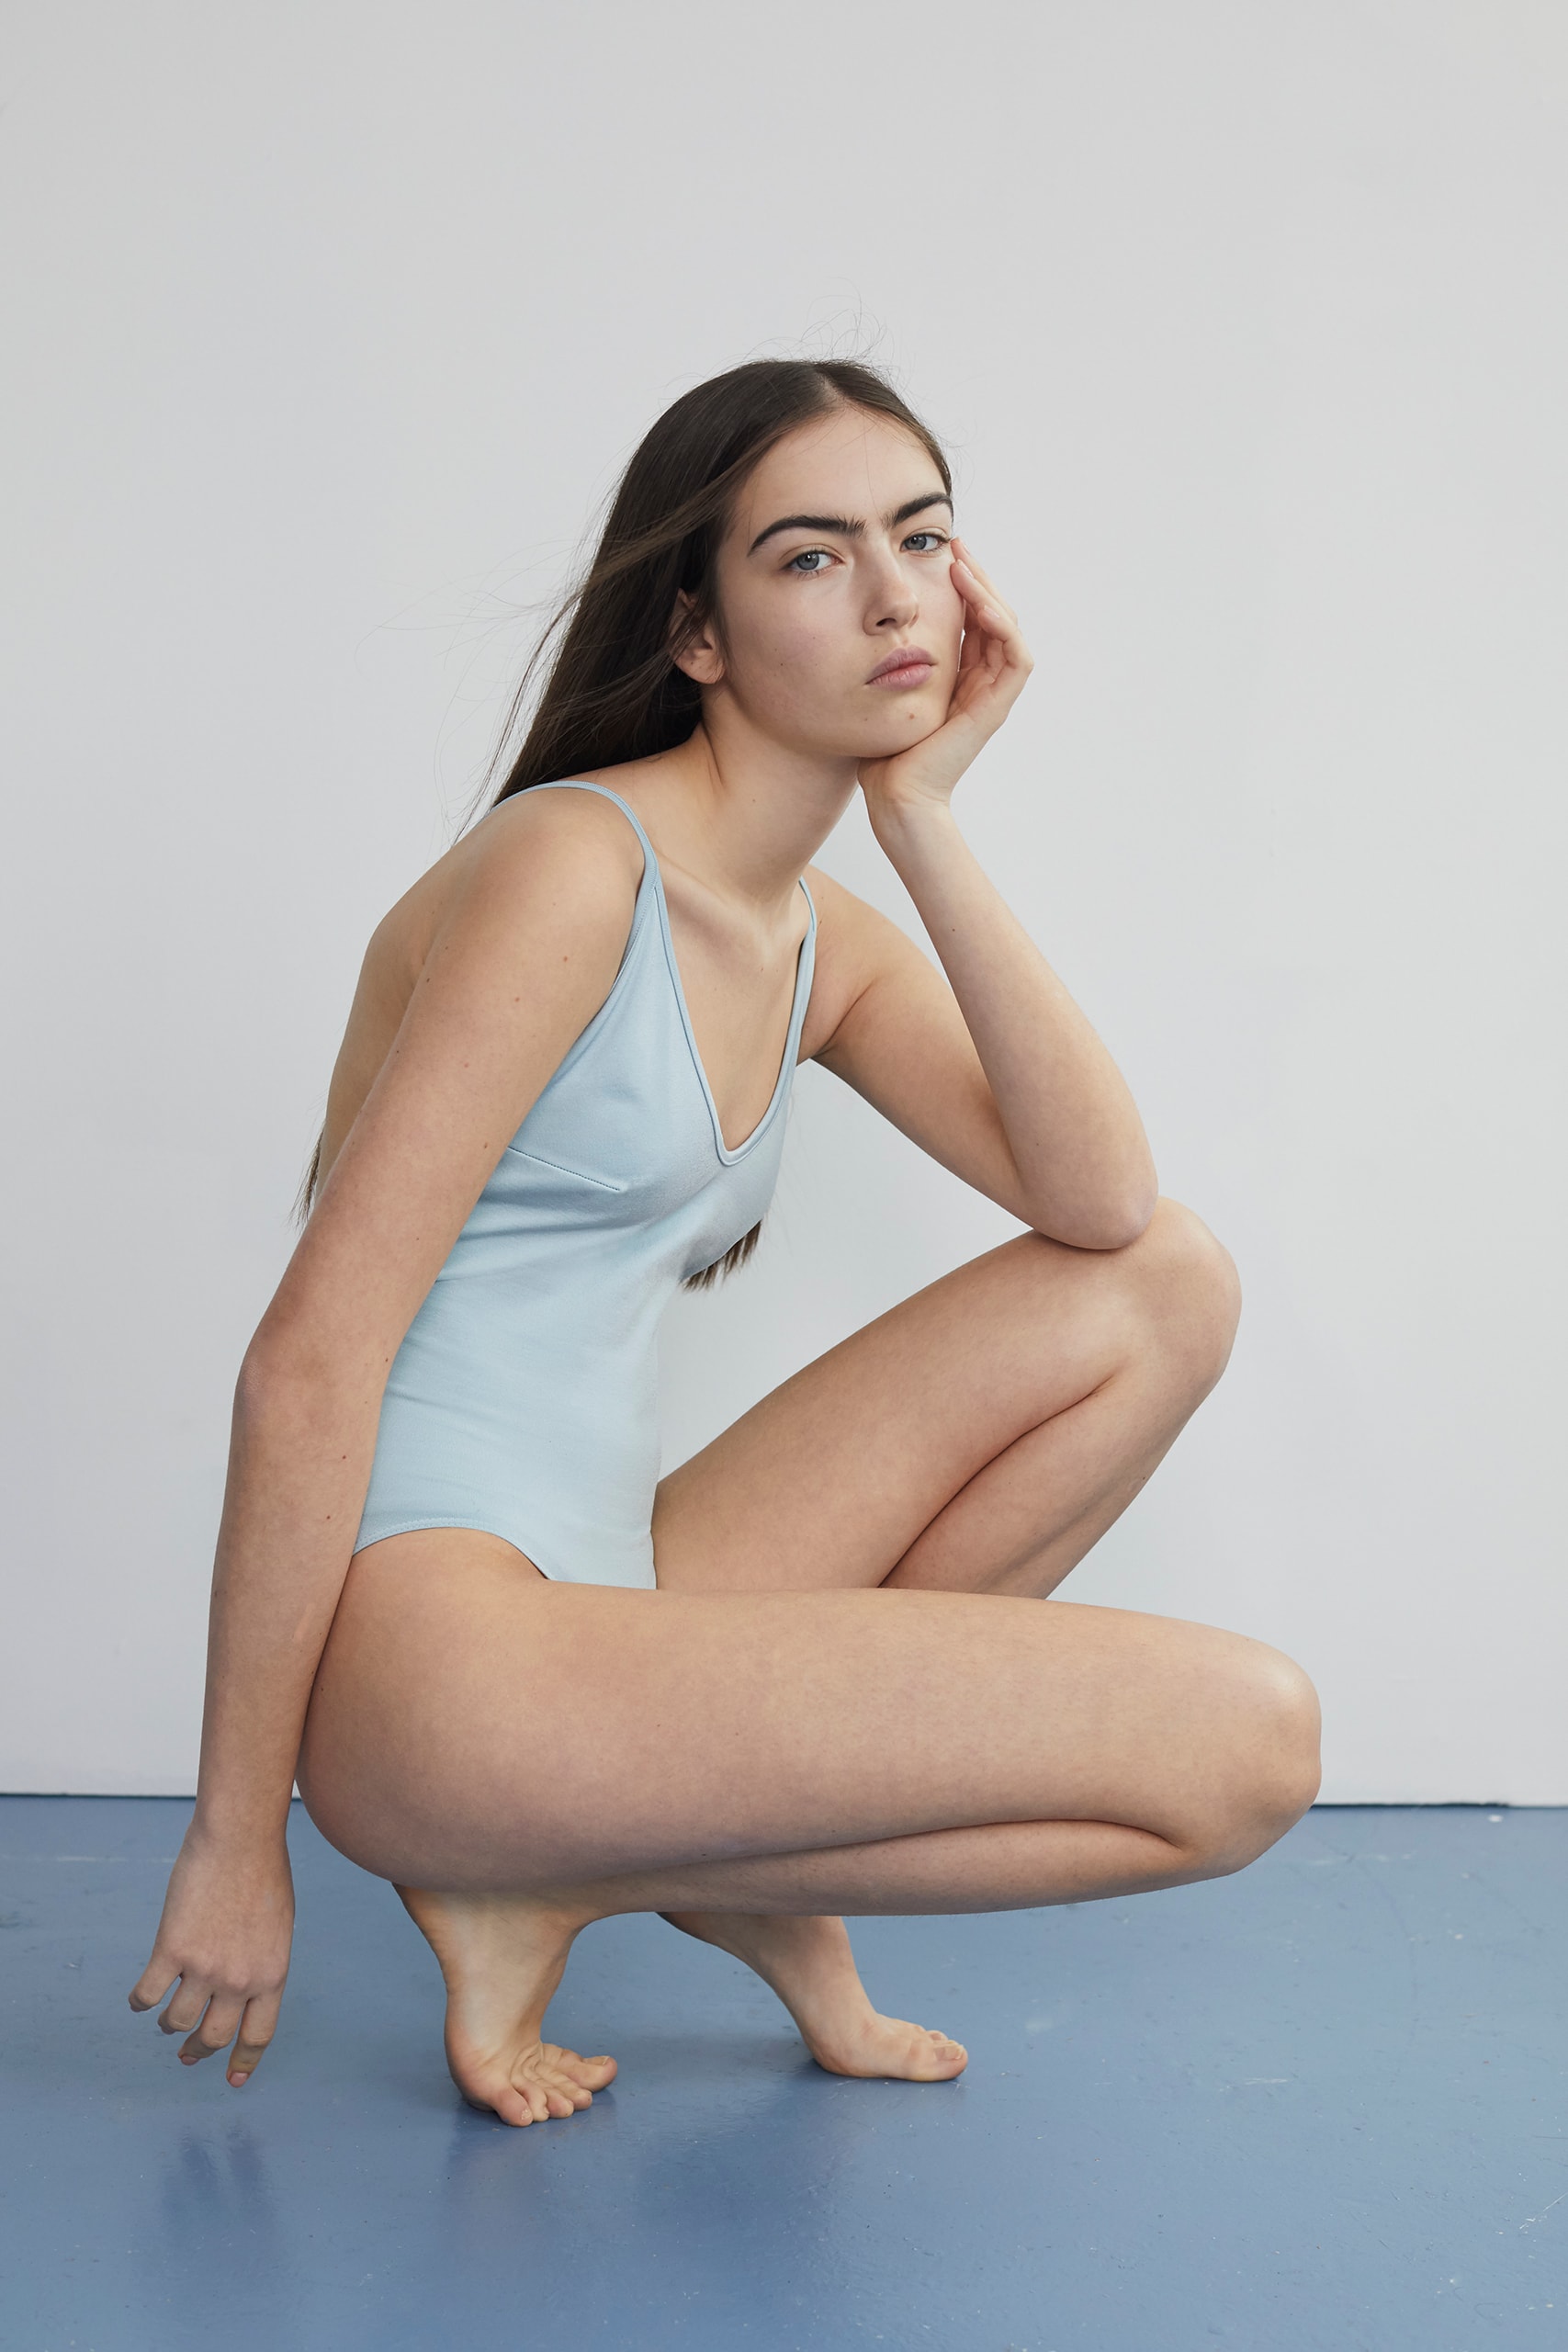 PRISM² Shapewear Swimwear Sportswear Sustainable PRactise New Material Invention Size Inclusive Paloma Elsesser